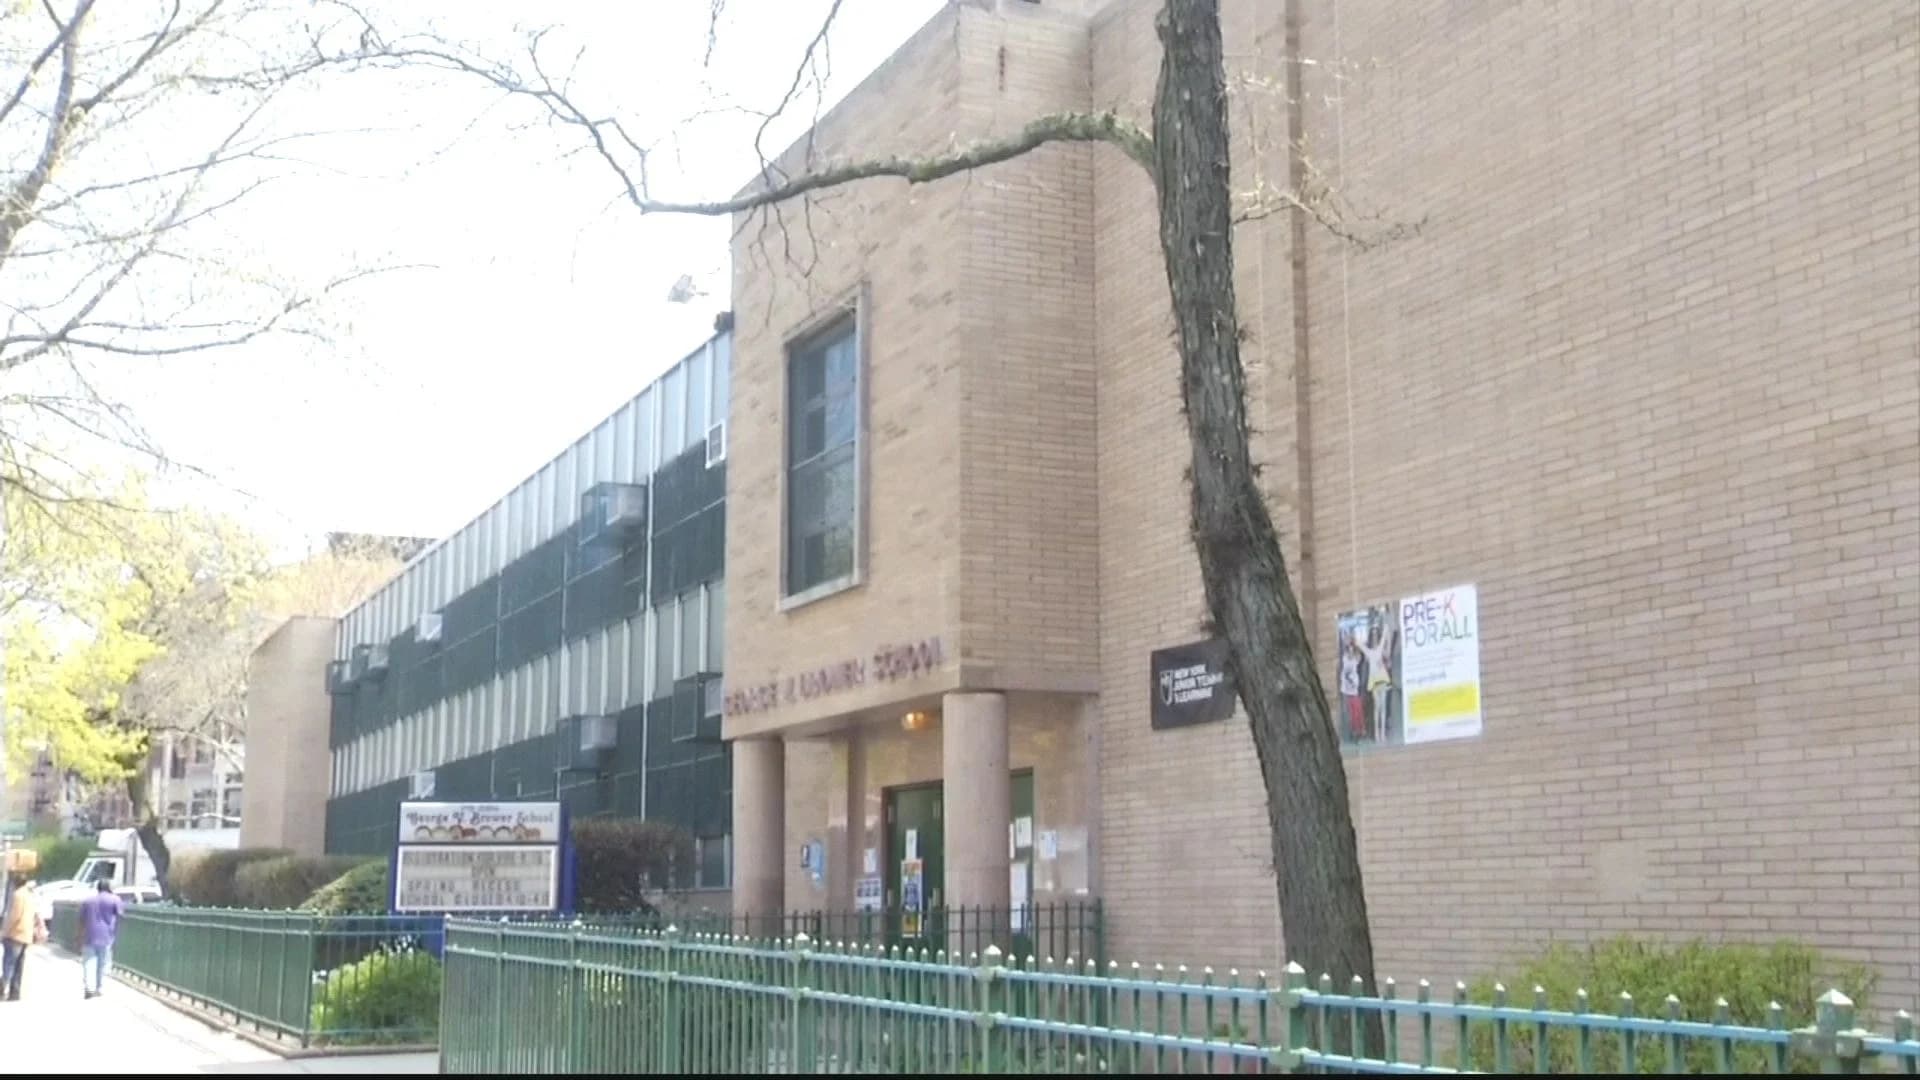 Parents: We weren't told about high lead levels at P.S. 289